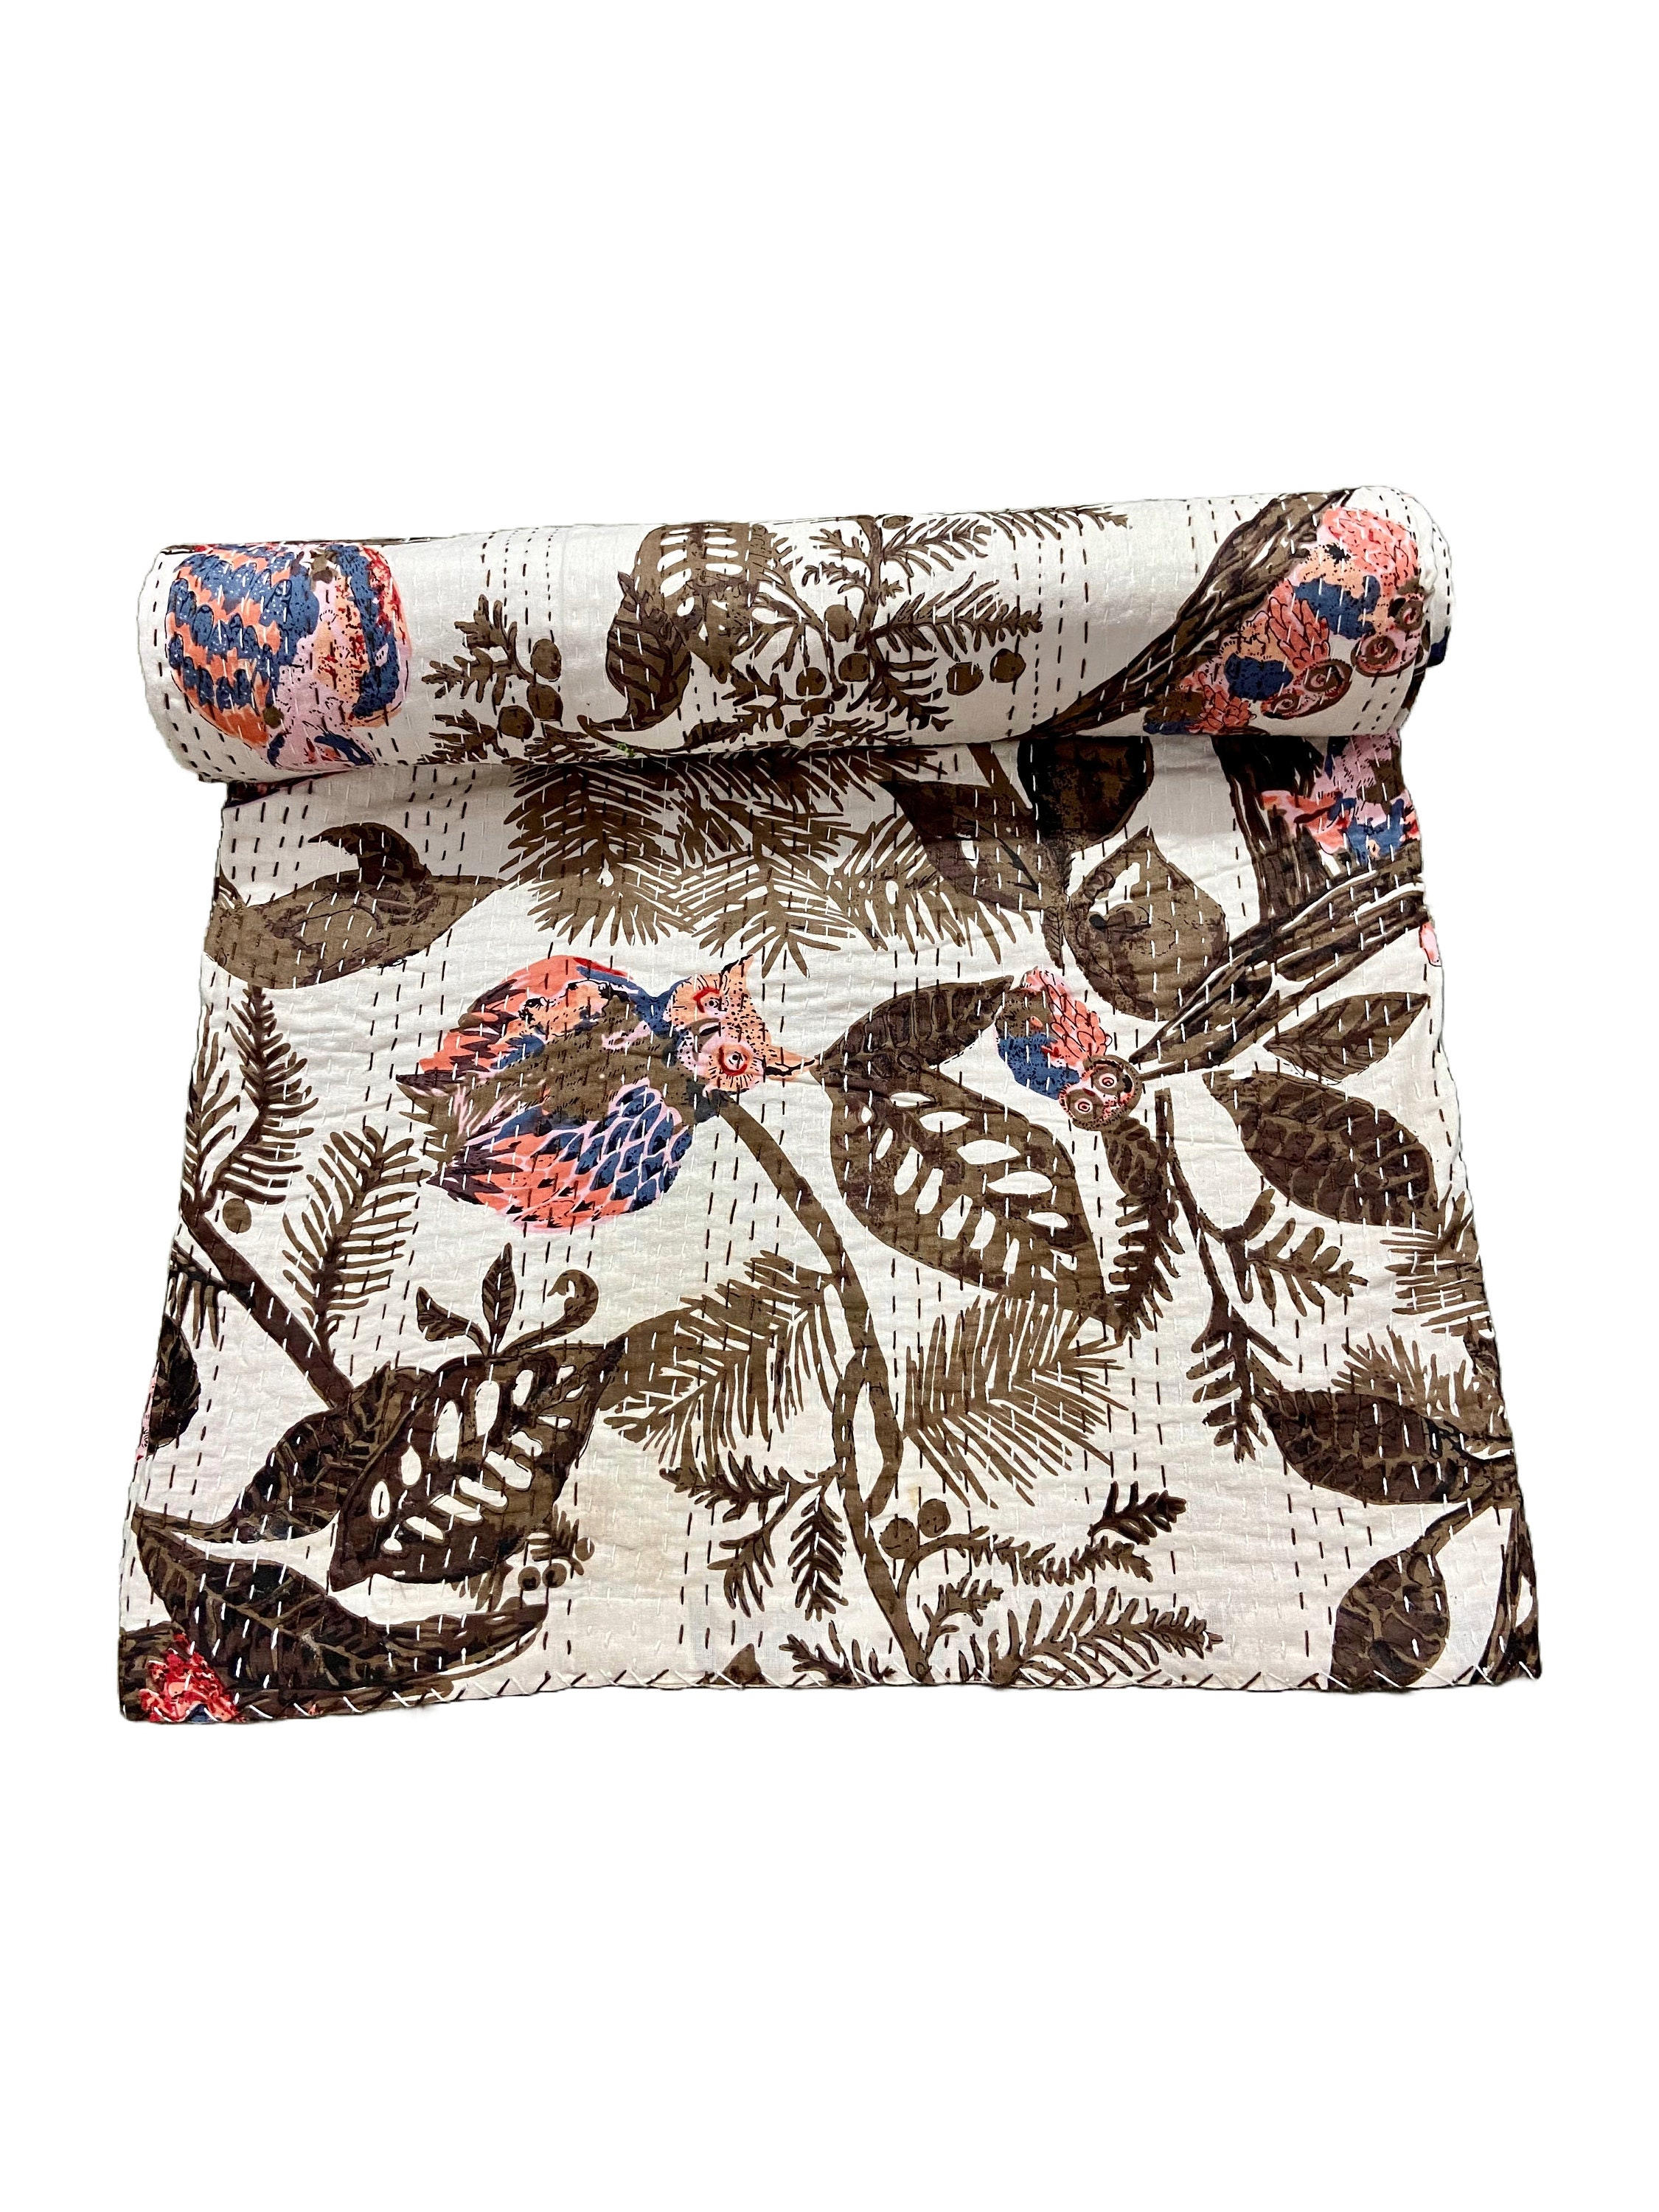 Brown Wild Owl Quilt Queen Pure Cotton Kantha Throw Blanket Bedspread Coverlet Kantha Bed Cover Boho